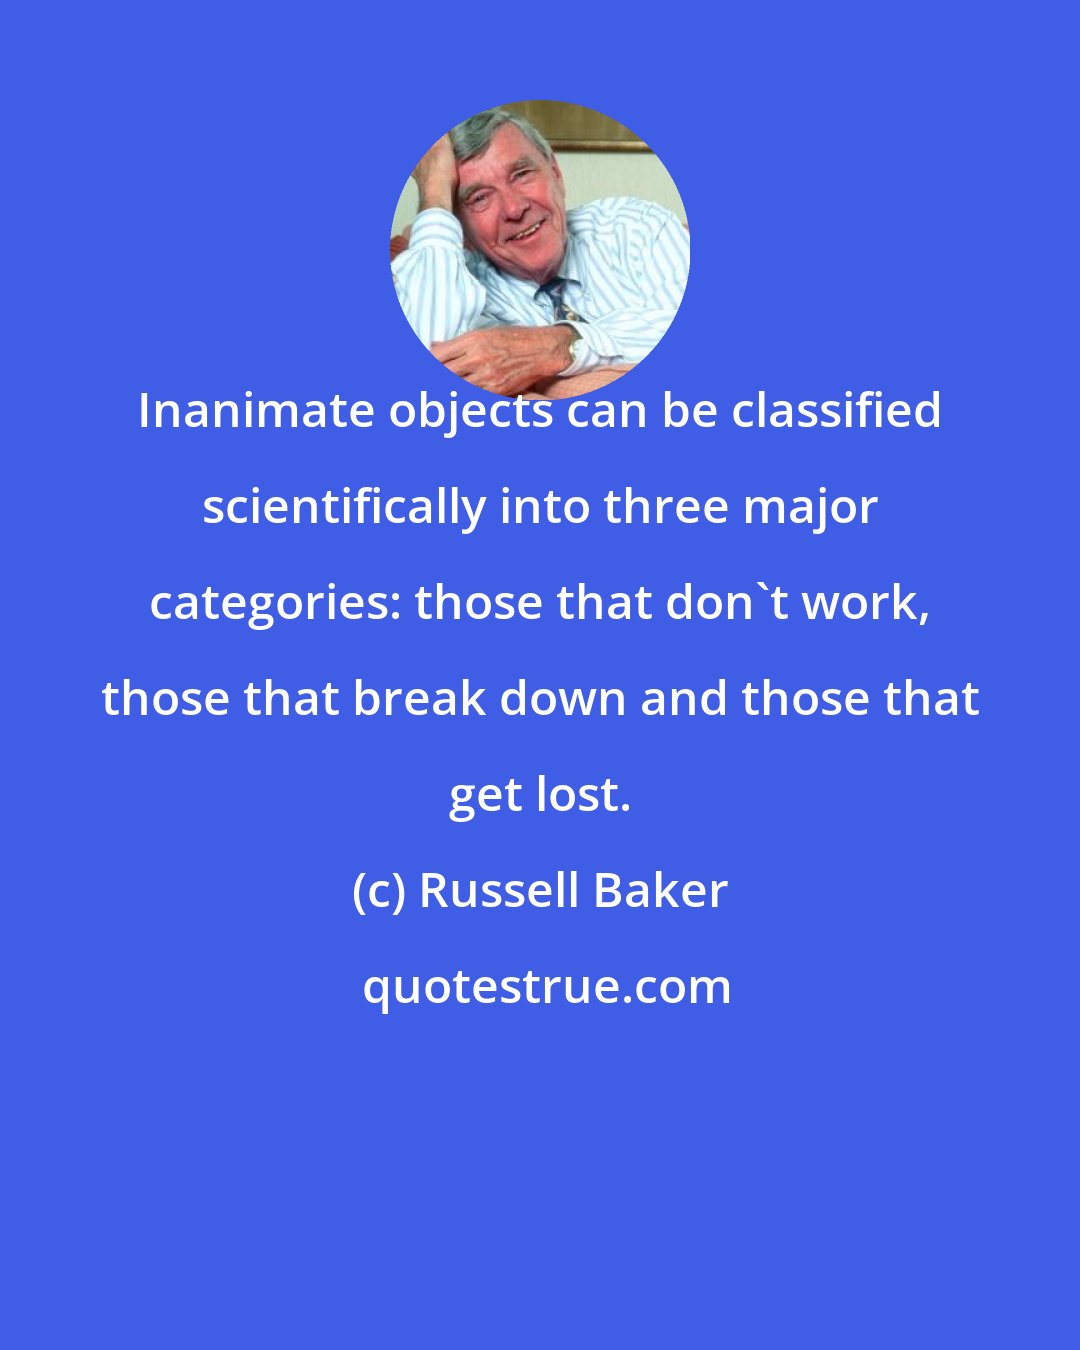 Russell Baker: Inanimate objects can be classified scientifically into three major categories: those that don't work, those that break down and those that get lost.